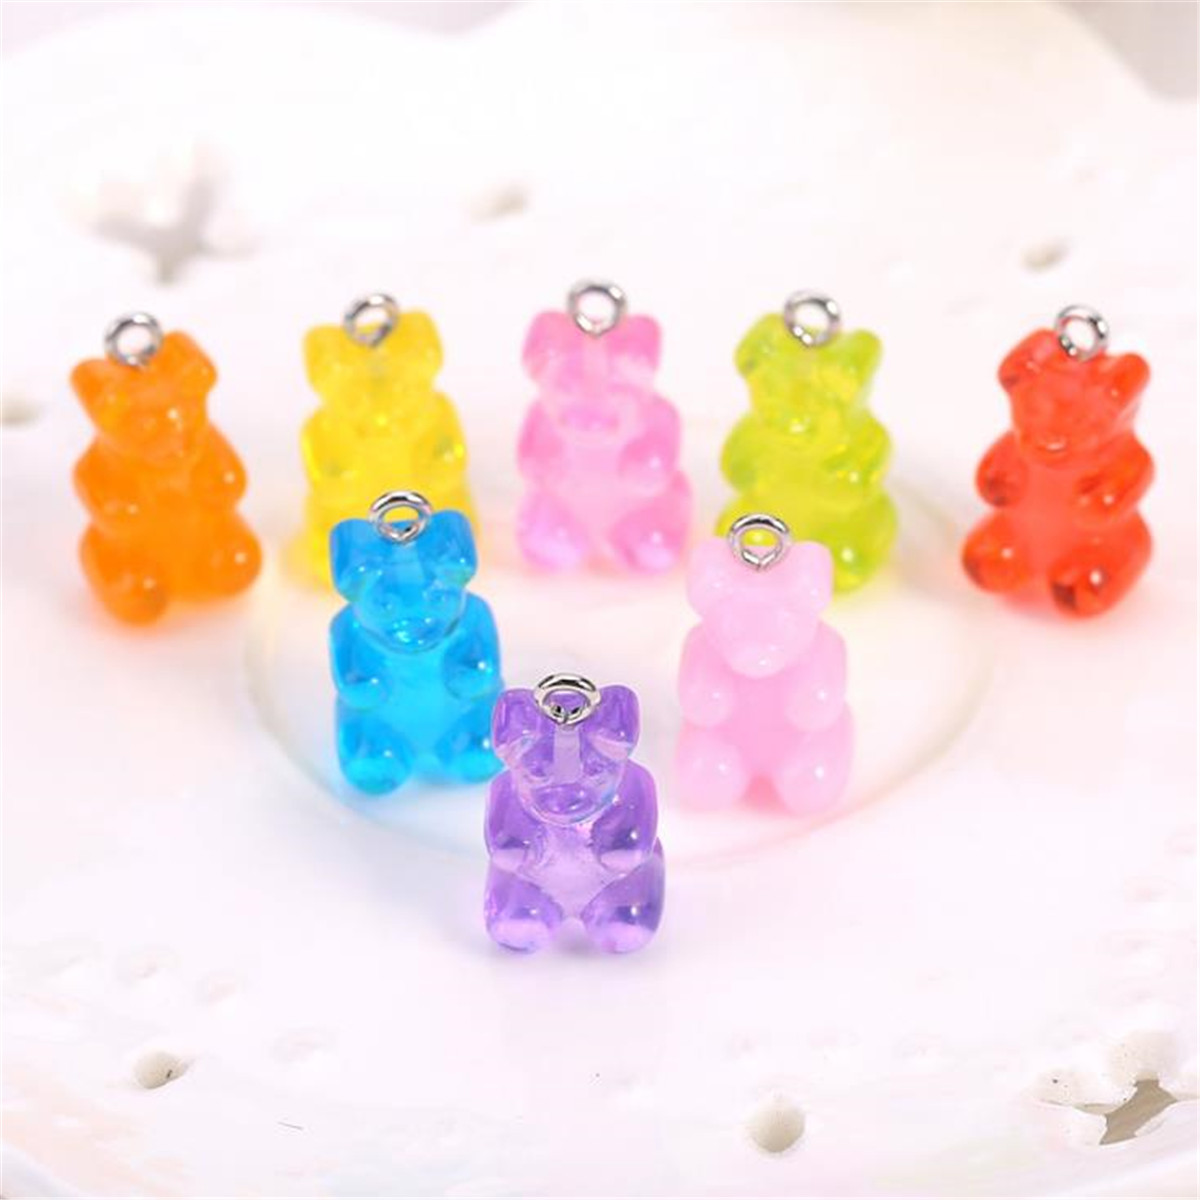 10X Colorful Resin Cute Bear Charms Pendant DIY Making Necklace Earrings Jewelry